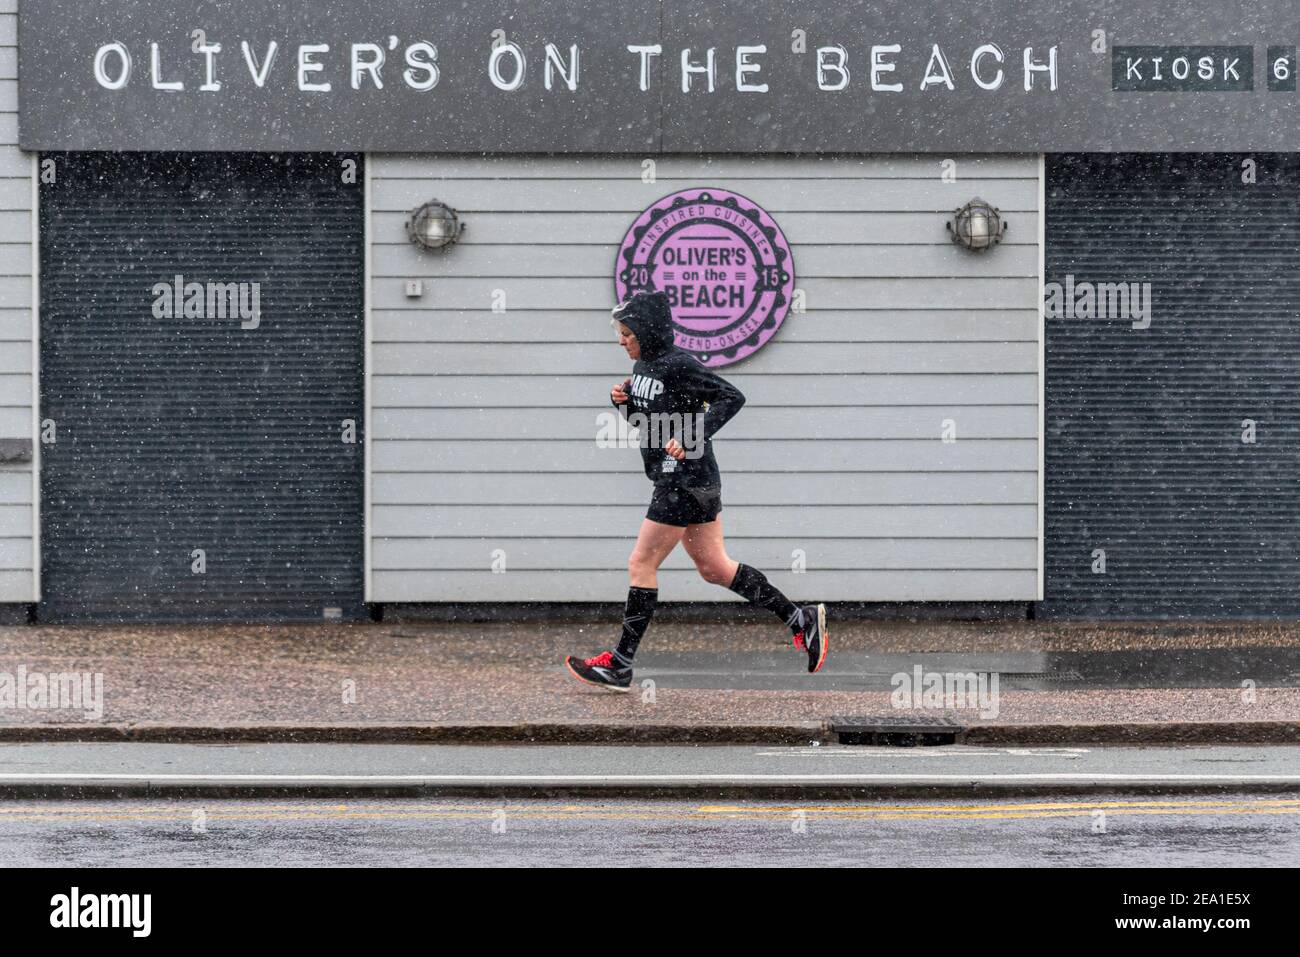 Southend on Sea, Essex, UK. 7th Feb, 2021. Storm Darcy reached Southend on Sea later than initially forecast, with the area remaining wet overnight. Snow and sleety flurries arrived from around 7am, which didn’t deter joggers. A female runner is passing Oliver's on the Beach restaurant kiosk. Owned by members of Jamie Oliver's family. COVID 19 lockdown warnings remain in place Stock Photo